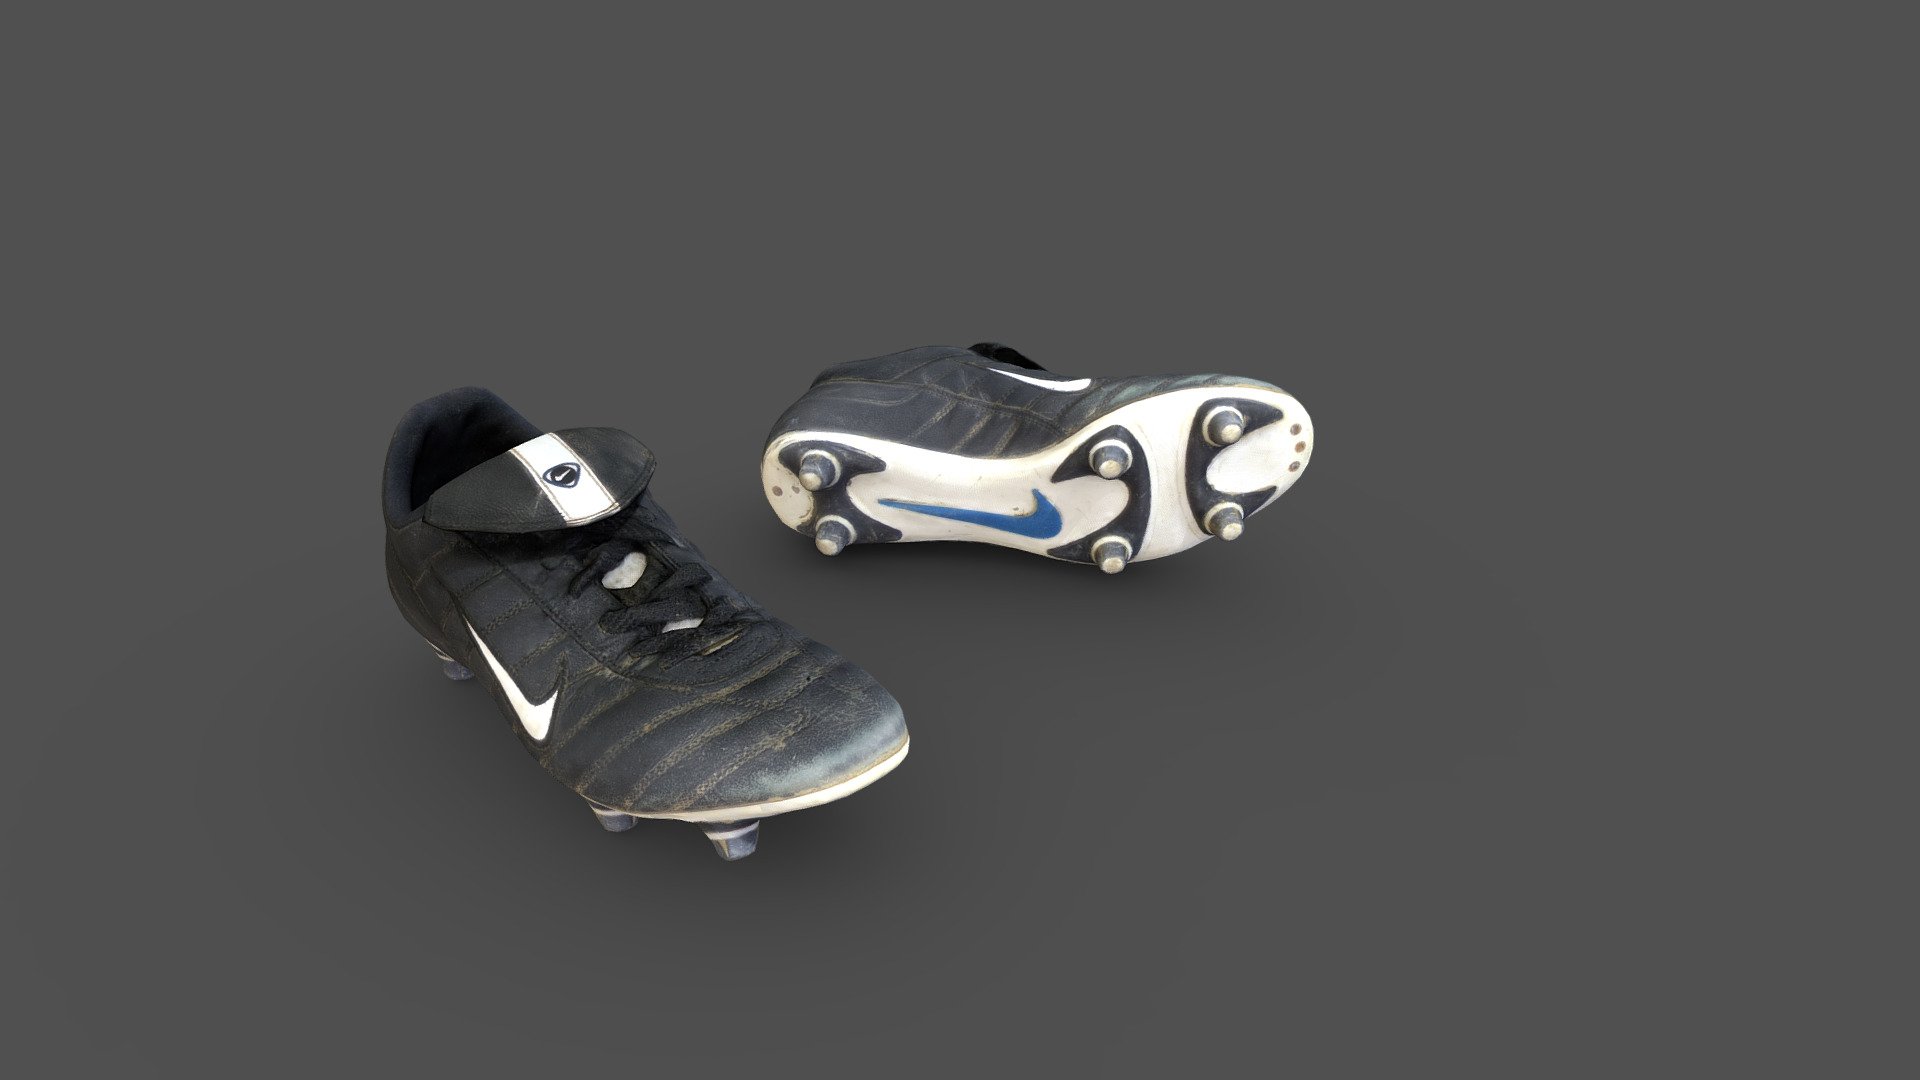 Pair of Soccer Shoes Low Poly

Topology: Quads

Polygon count: 6193

Vertices count: 6195

Textures: Diffuse, Normal, Specular, Glossiness, Ambient Occlusion ( all in 4k resolution)

UV mapped with non-overlapping

All files are zipped in one folder. Contains 3 file formats obj, blend &amp; fbx

Useful for games, renders and other graphical projects.

Thank you for interest. Best regards! - Soccer Shoes - Buy Royalty Free 3D model by Radju 3d model